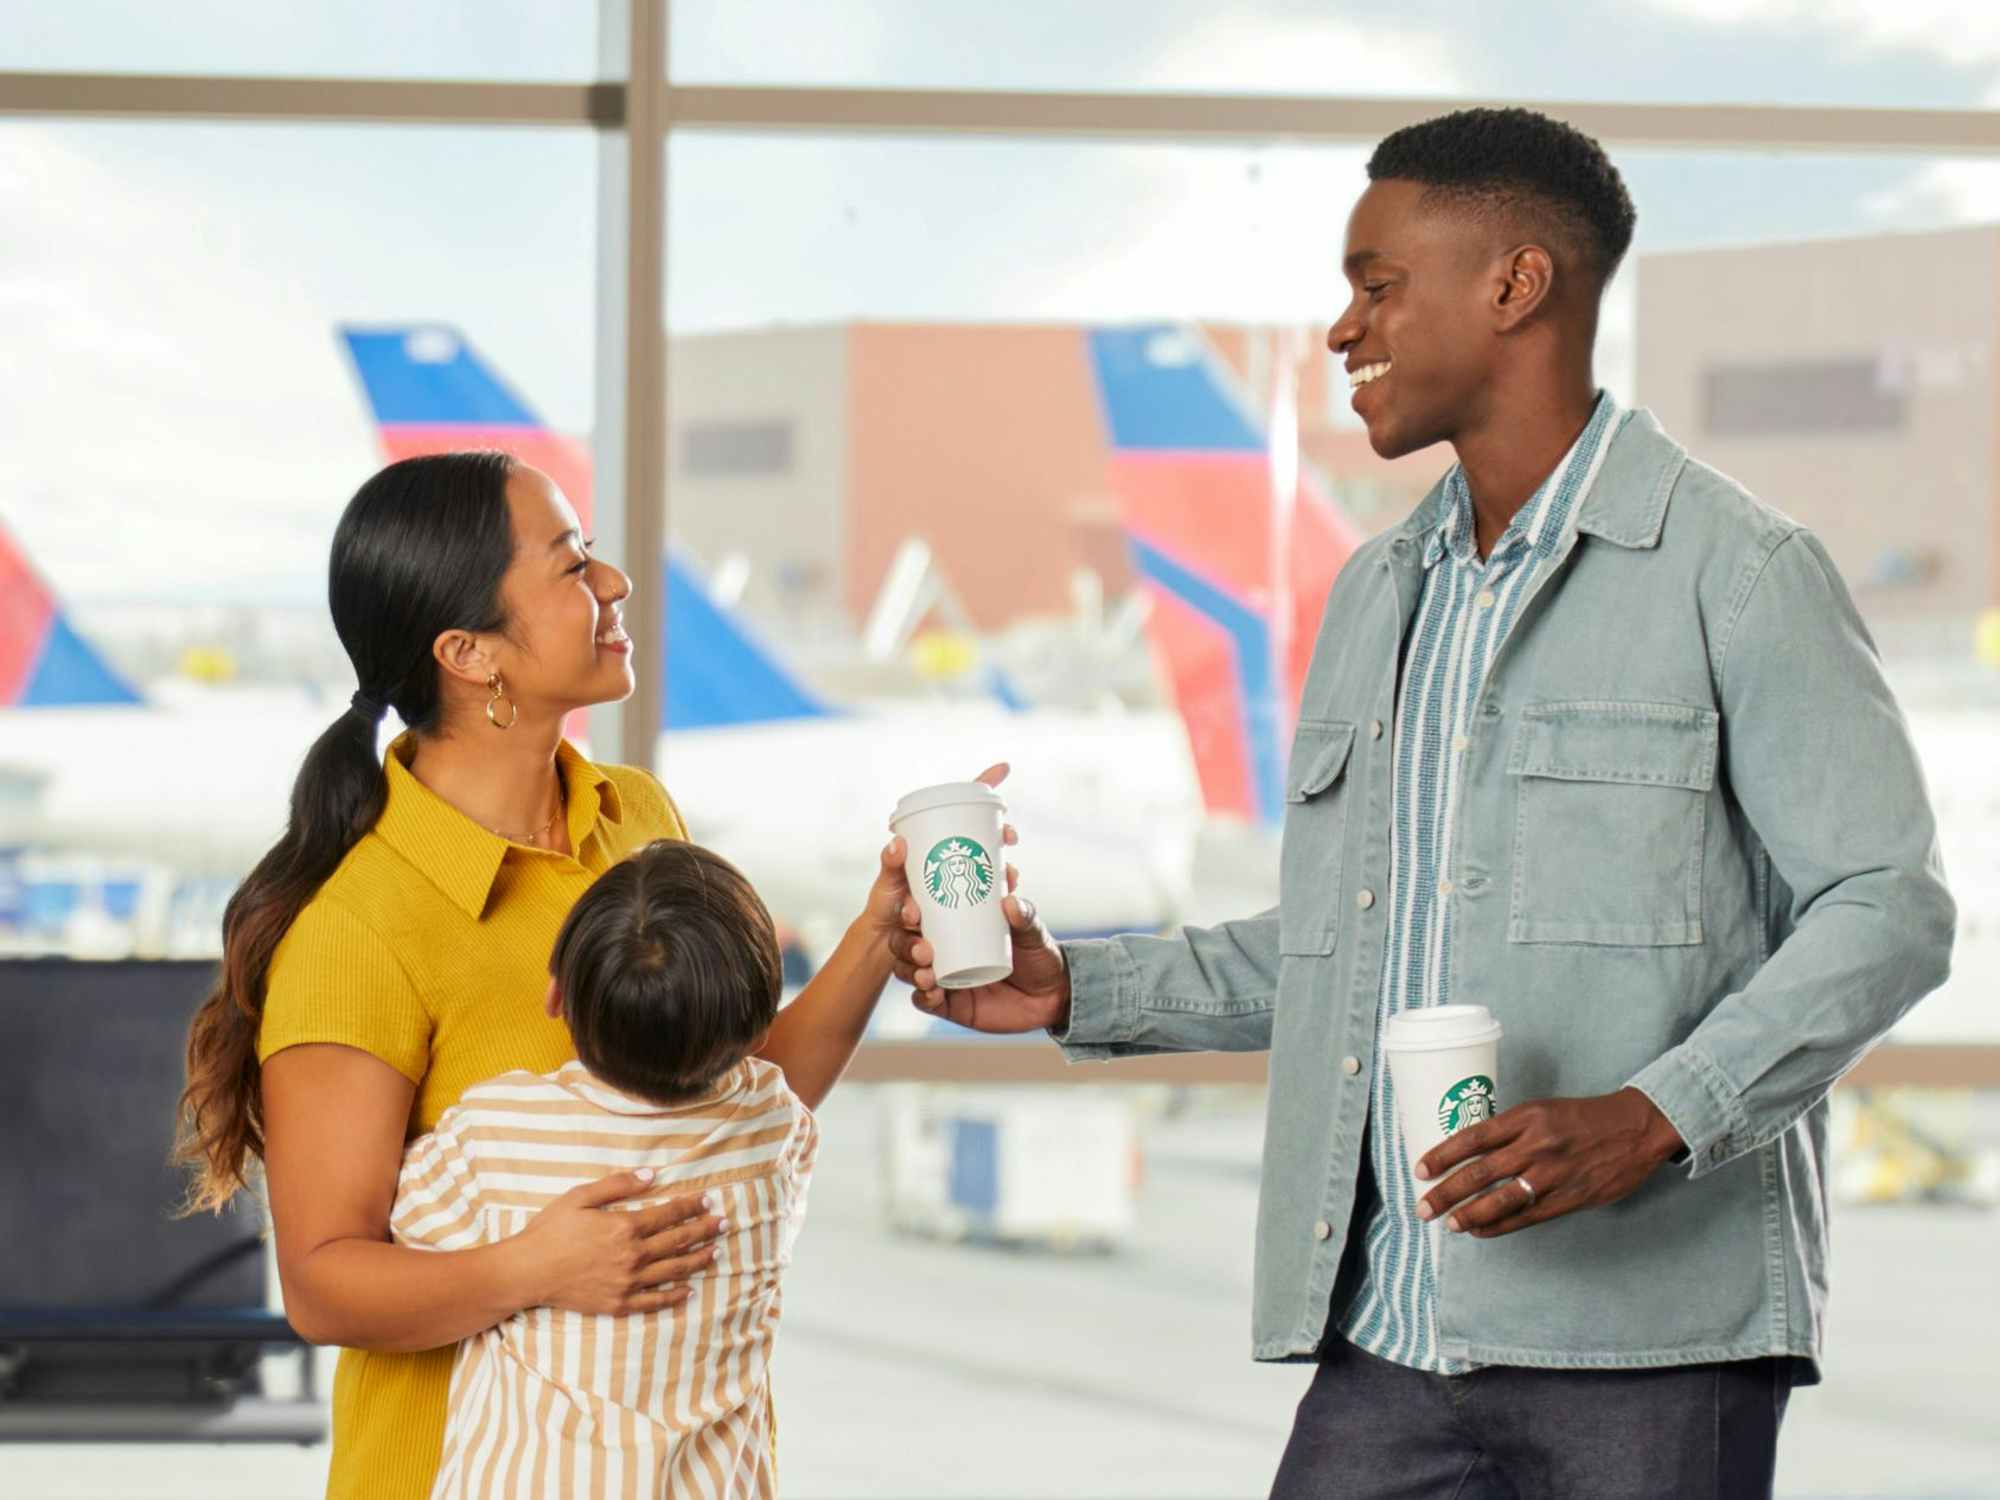 a family in an airport in front of some Delta planes holding Starbucks cups